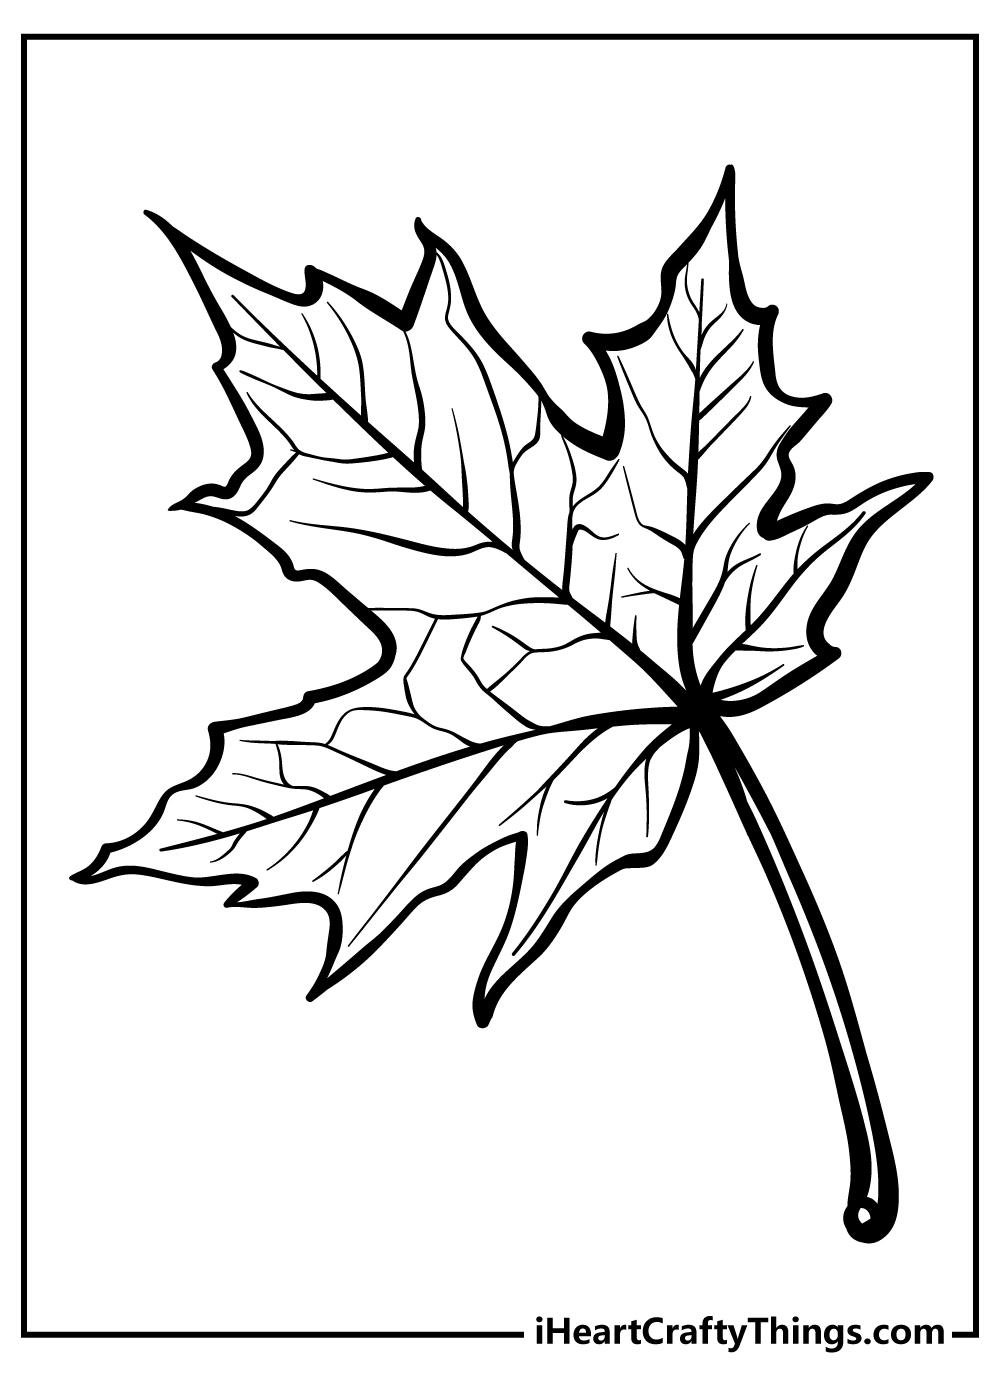 Leaf Coloring Pages for kids free download